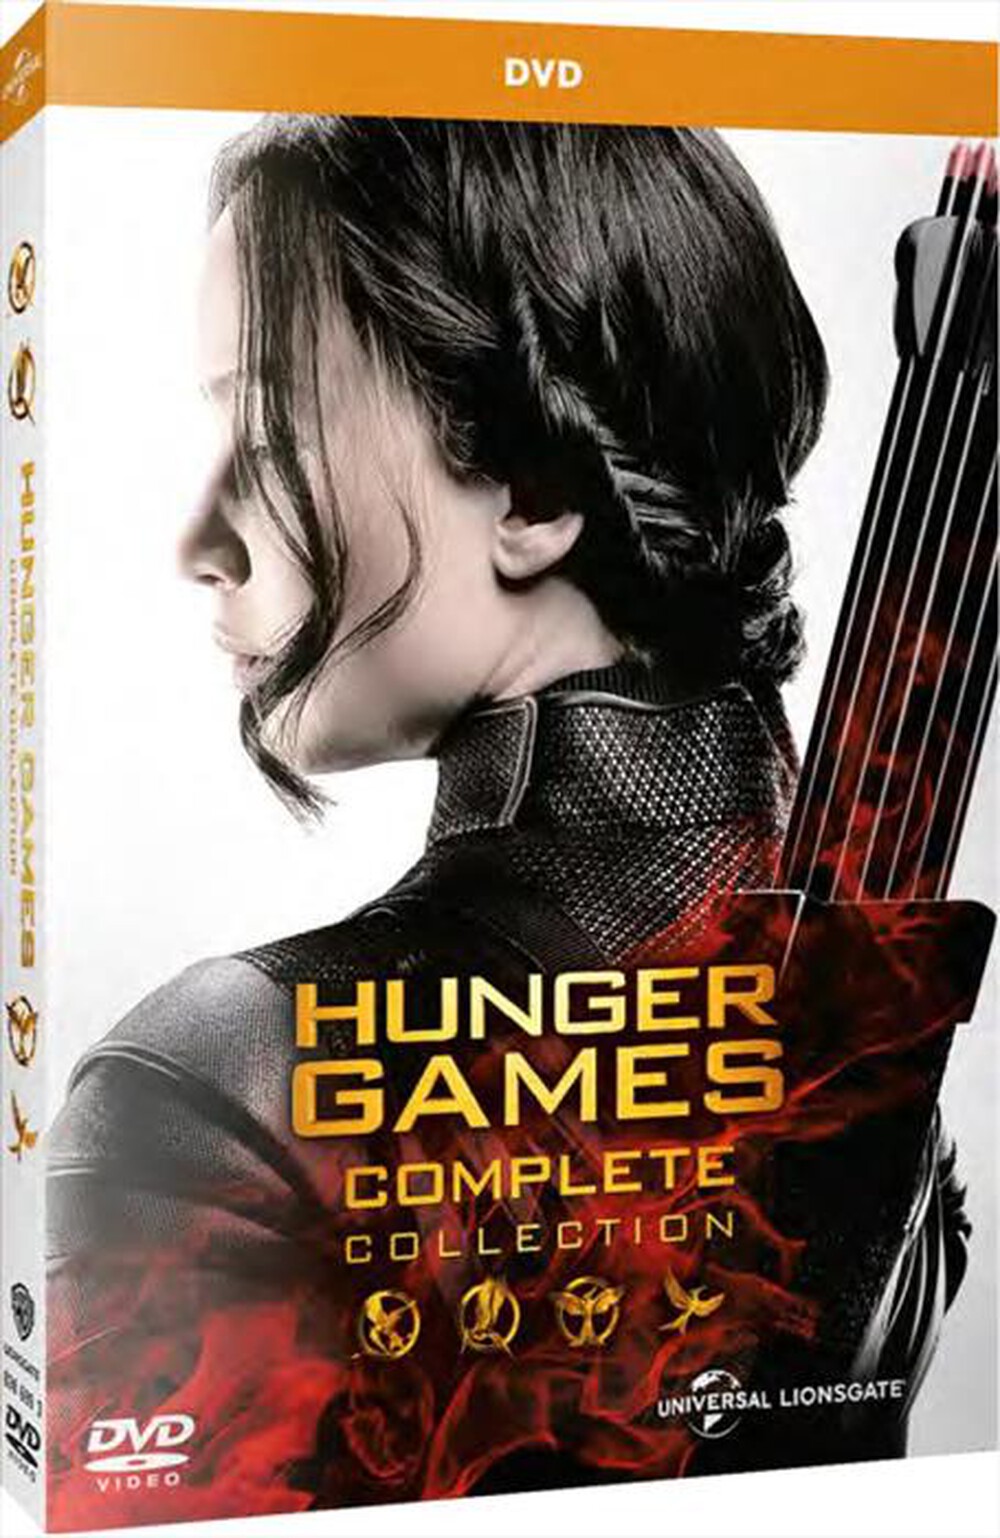 "UNIVERSAL PICTURES - Hunger Games 10Th Anniversary Complete Collectio"